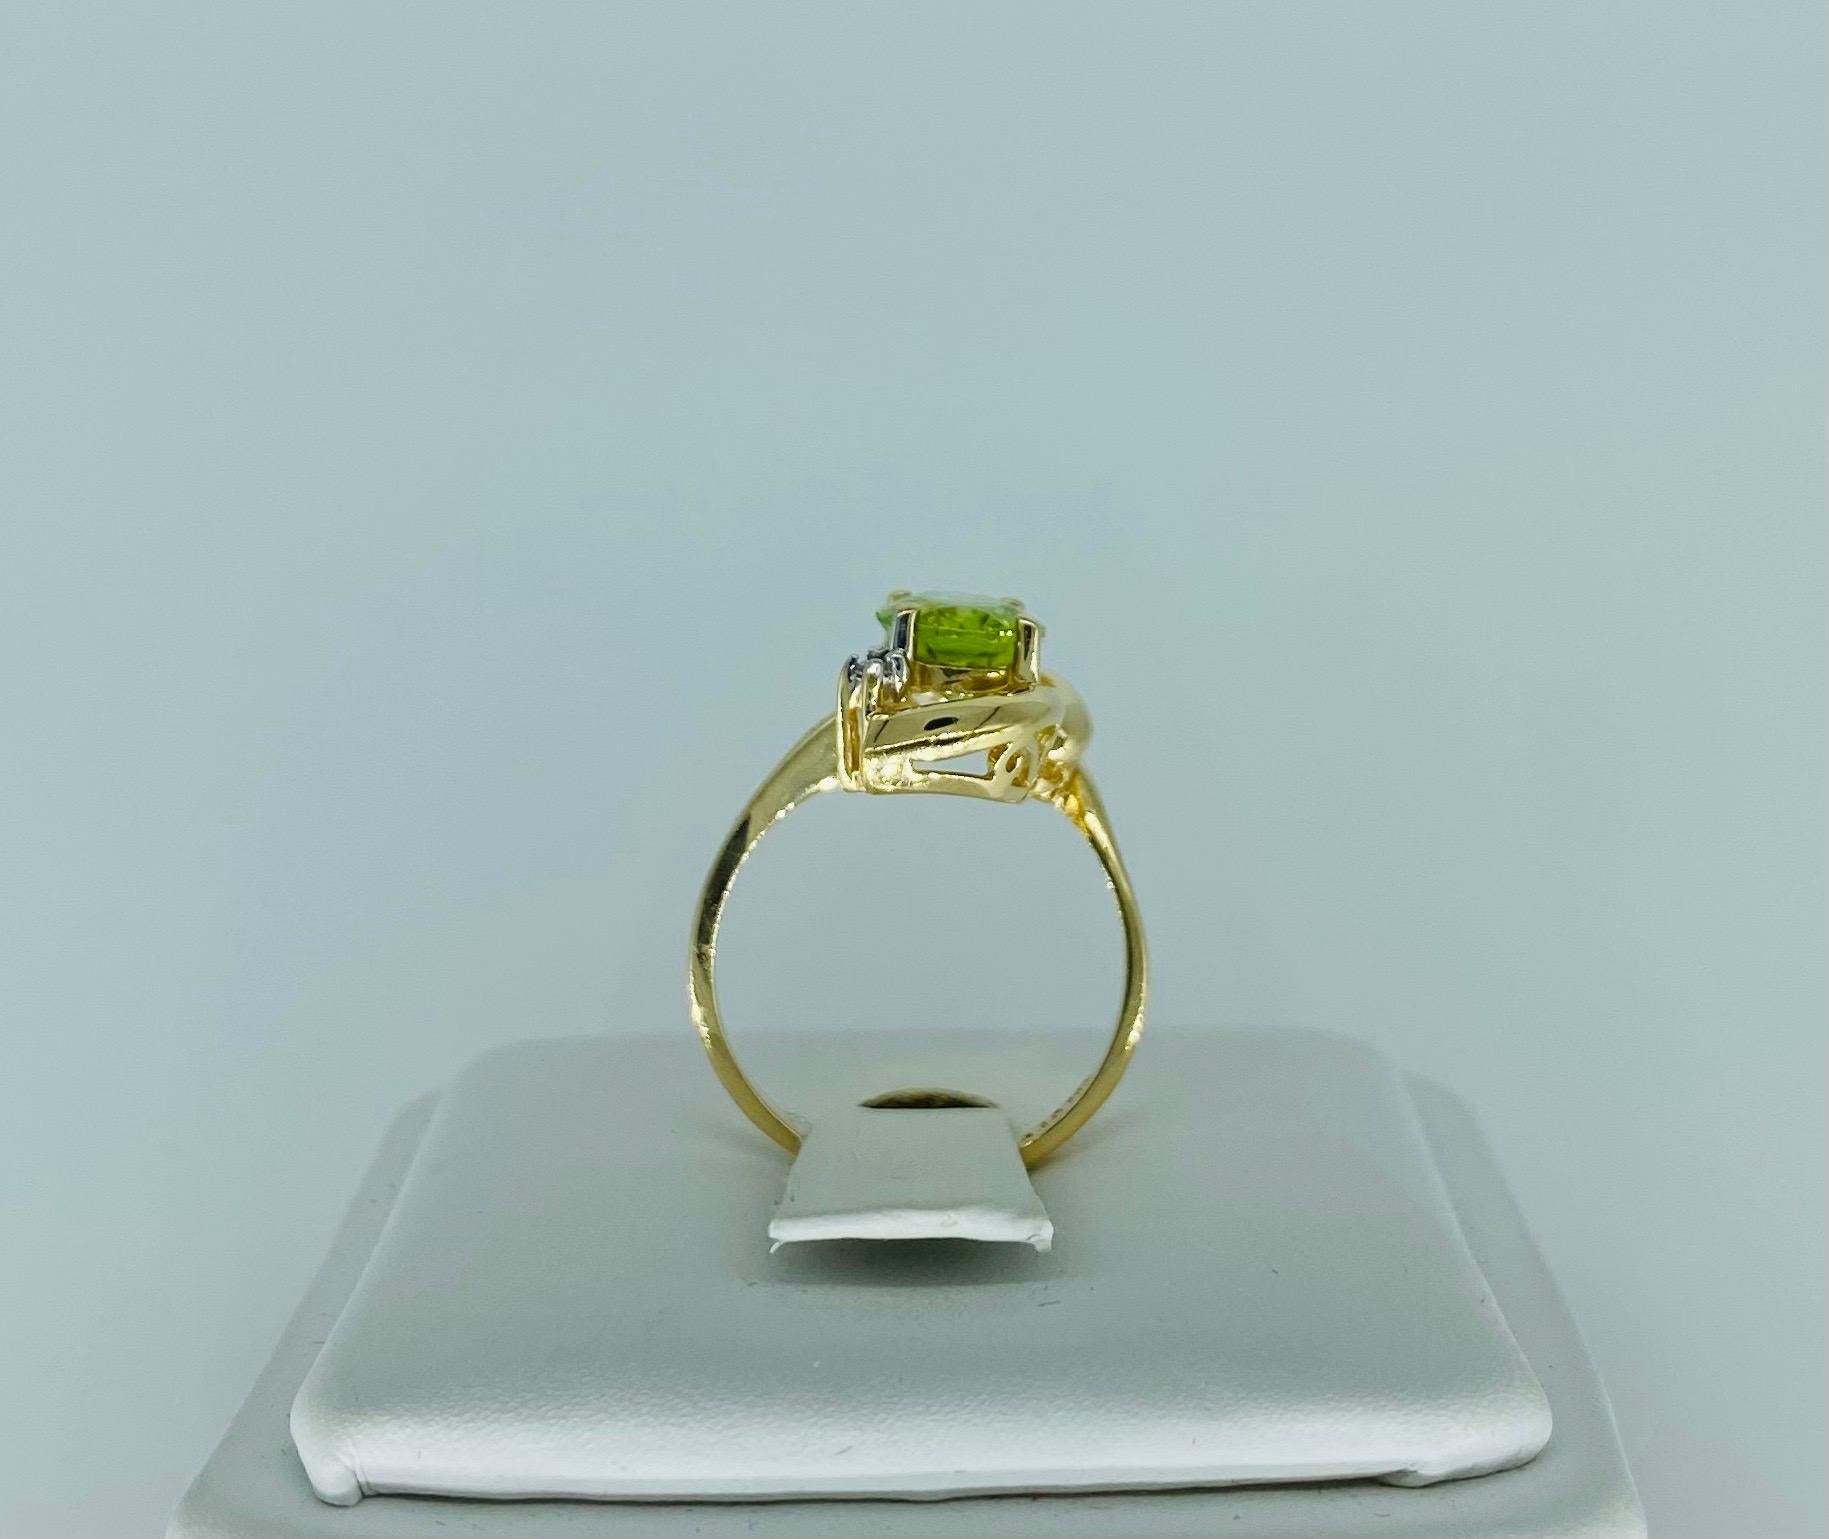 Vintage 2.02 Carat Peridot & Diamond Leaf Fashion Ring 14k Gold In Excellent Condition For Sale In Miami, FL